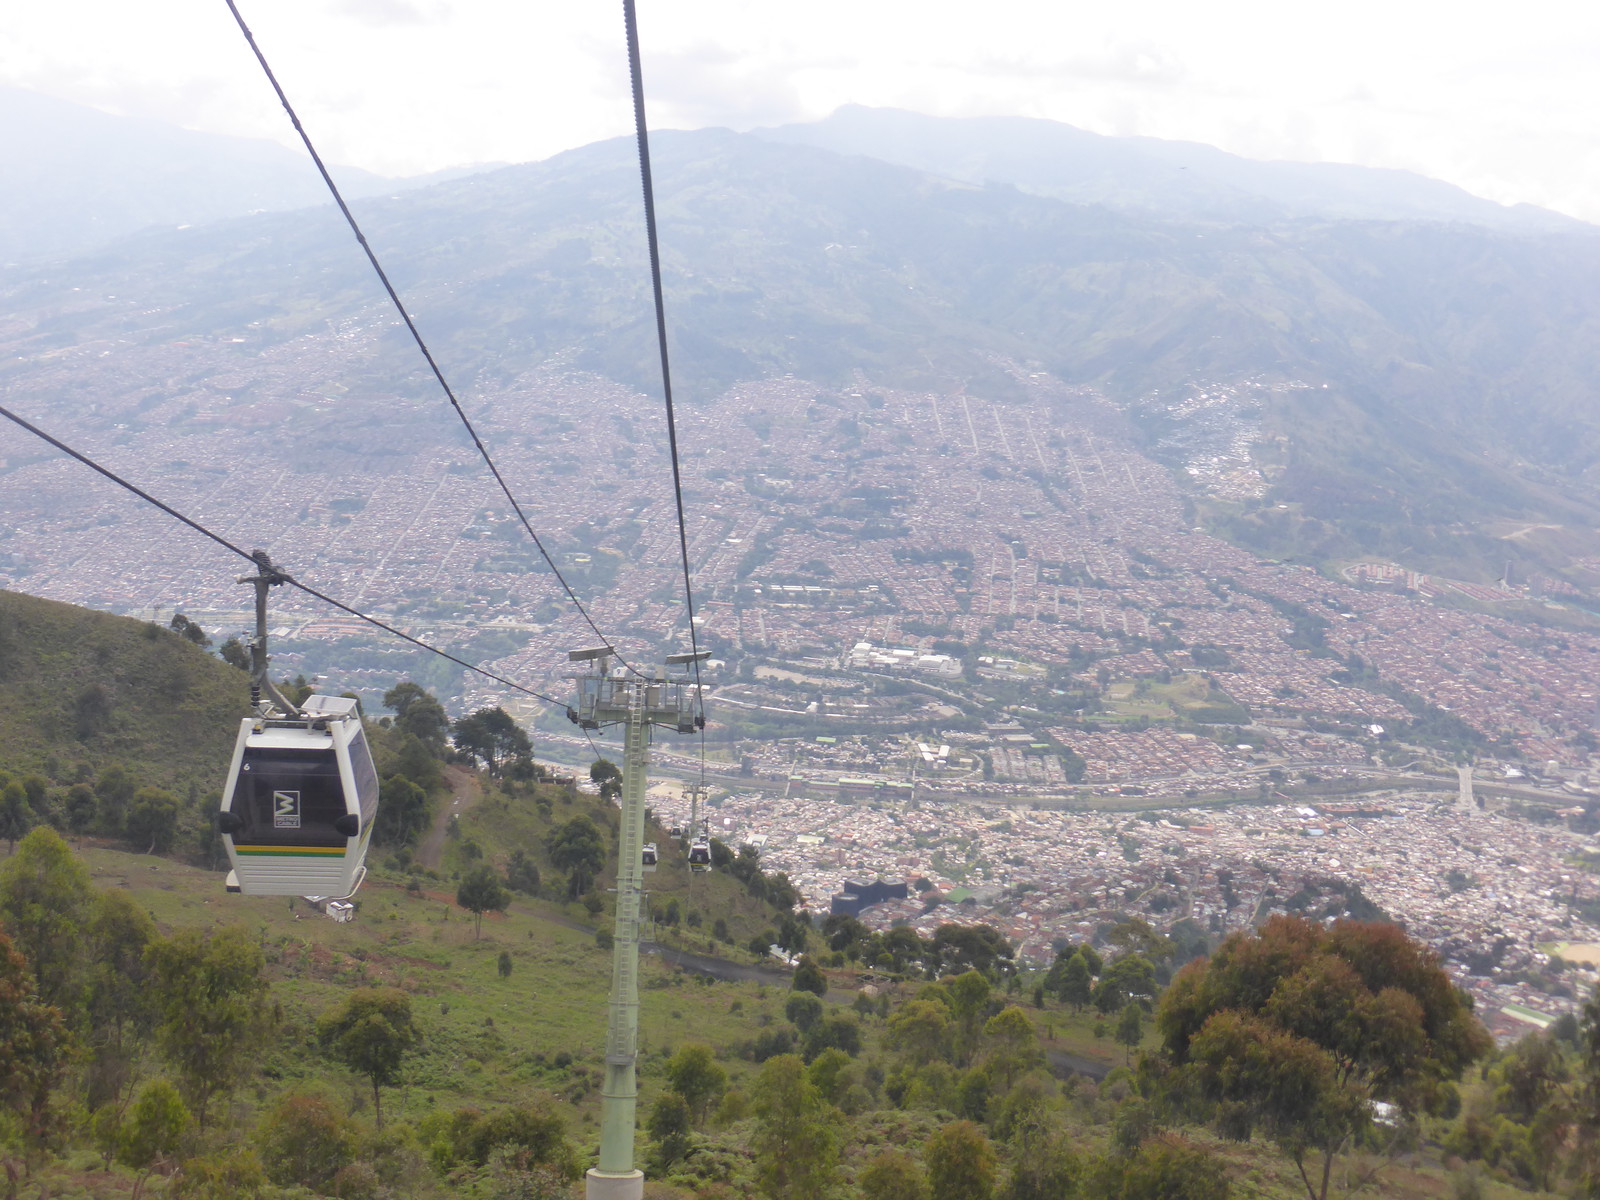 Heading back down into Medellín along cable car L